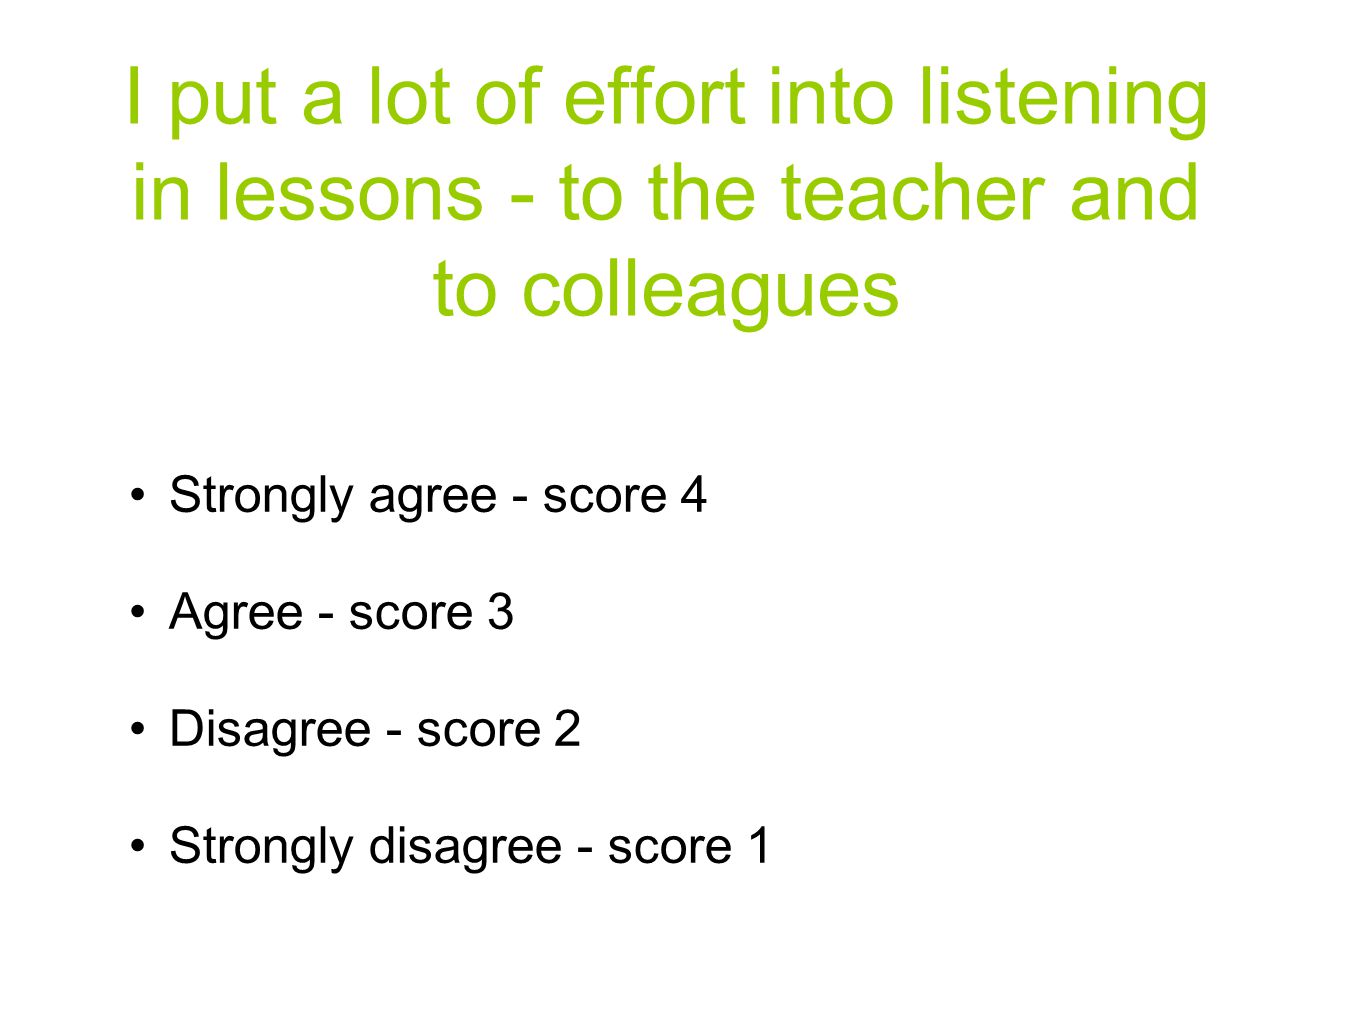 I put a lot of effort into listening in lessons - to the teacher and to colleagues Strongly agree - score 4 Agree - score 3 Disagree - score 2 Strongly disagree - score 1